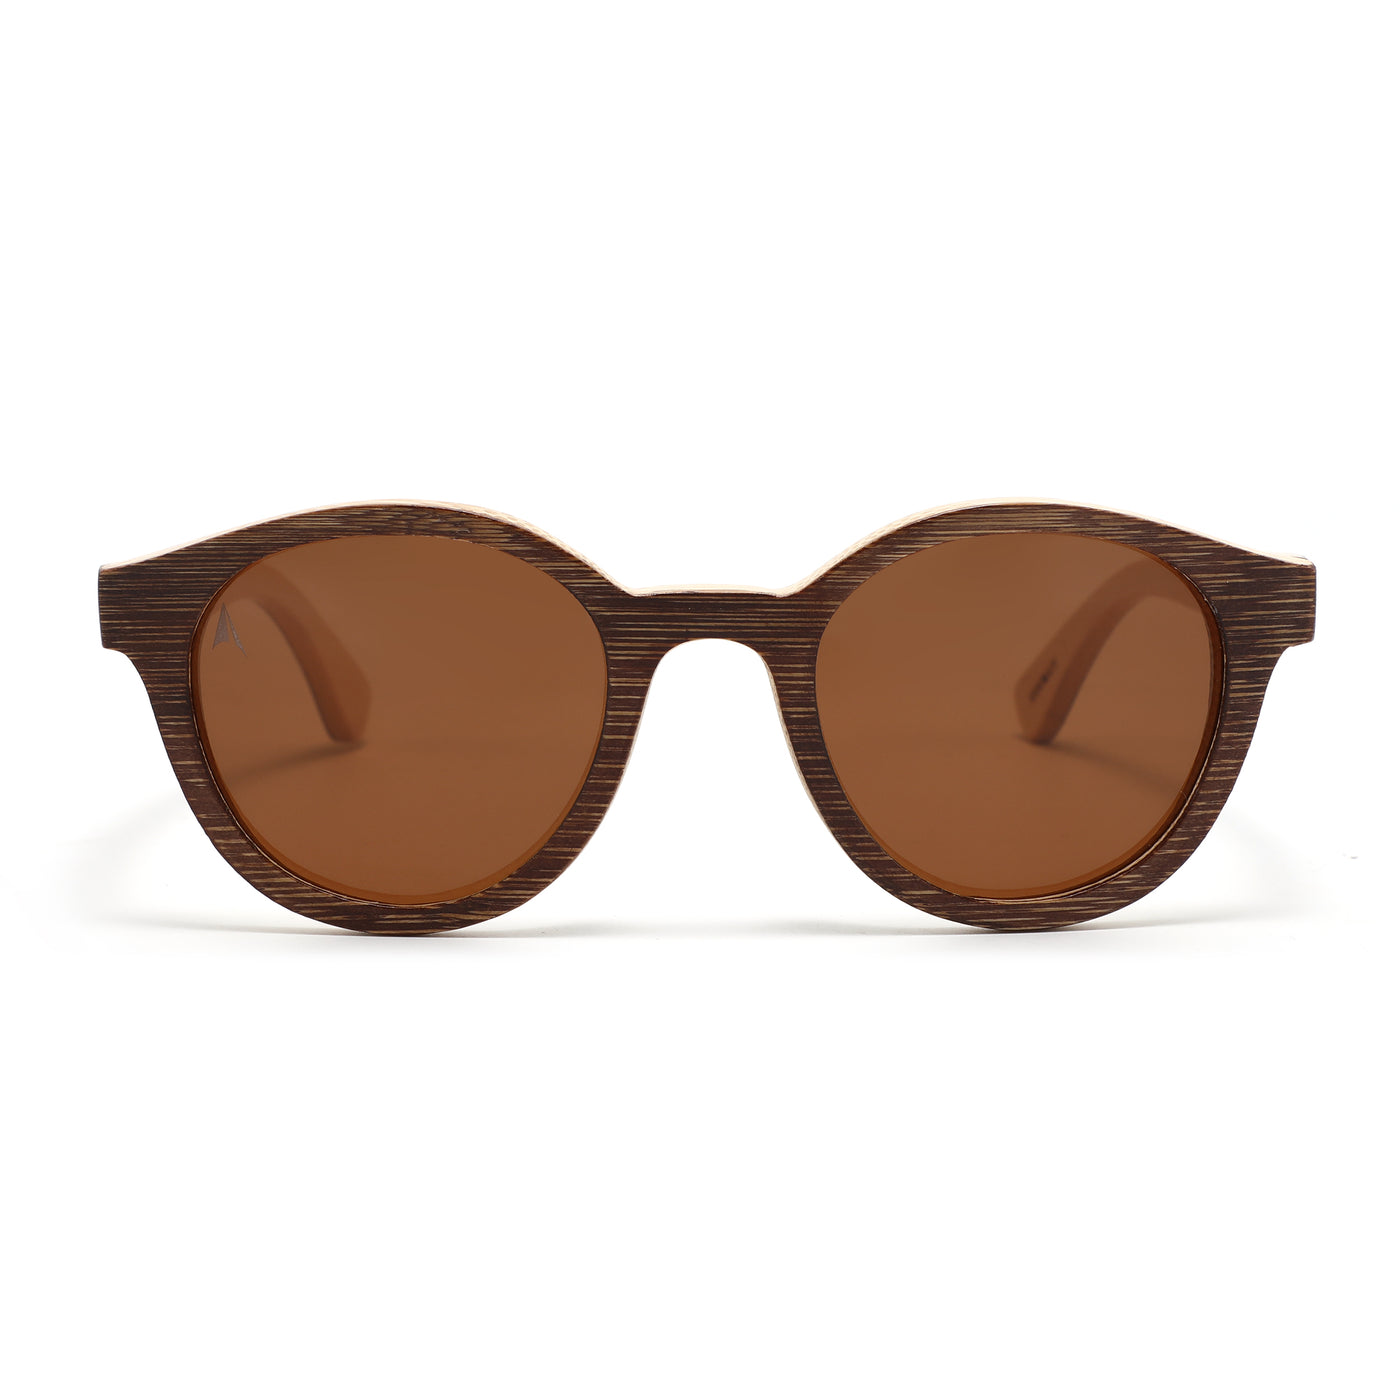 Peneda-Geres - bi-color bamboo with polarized brown lenses - front